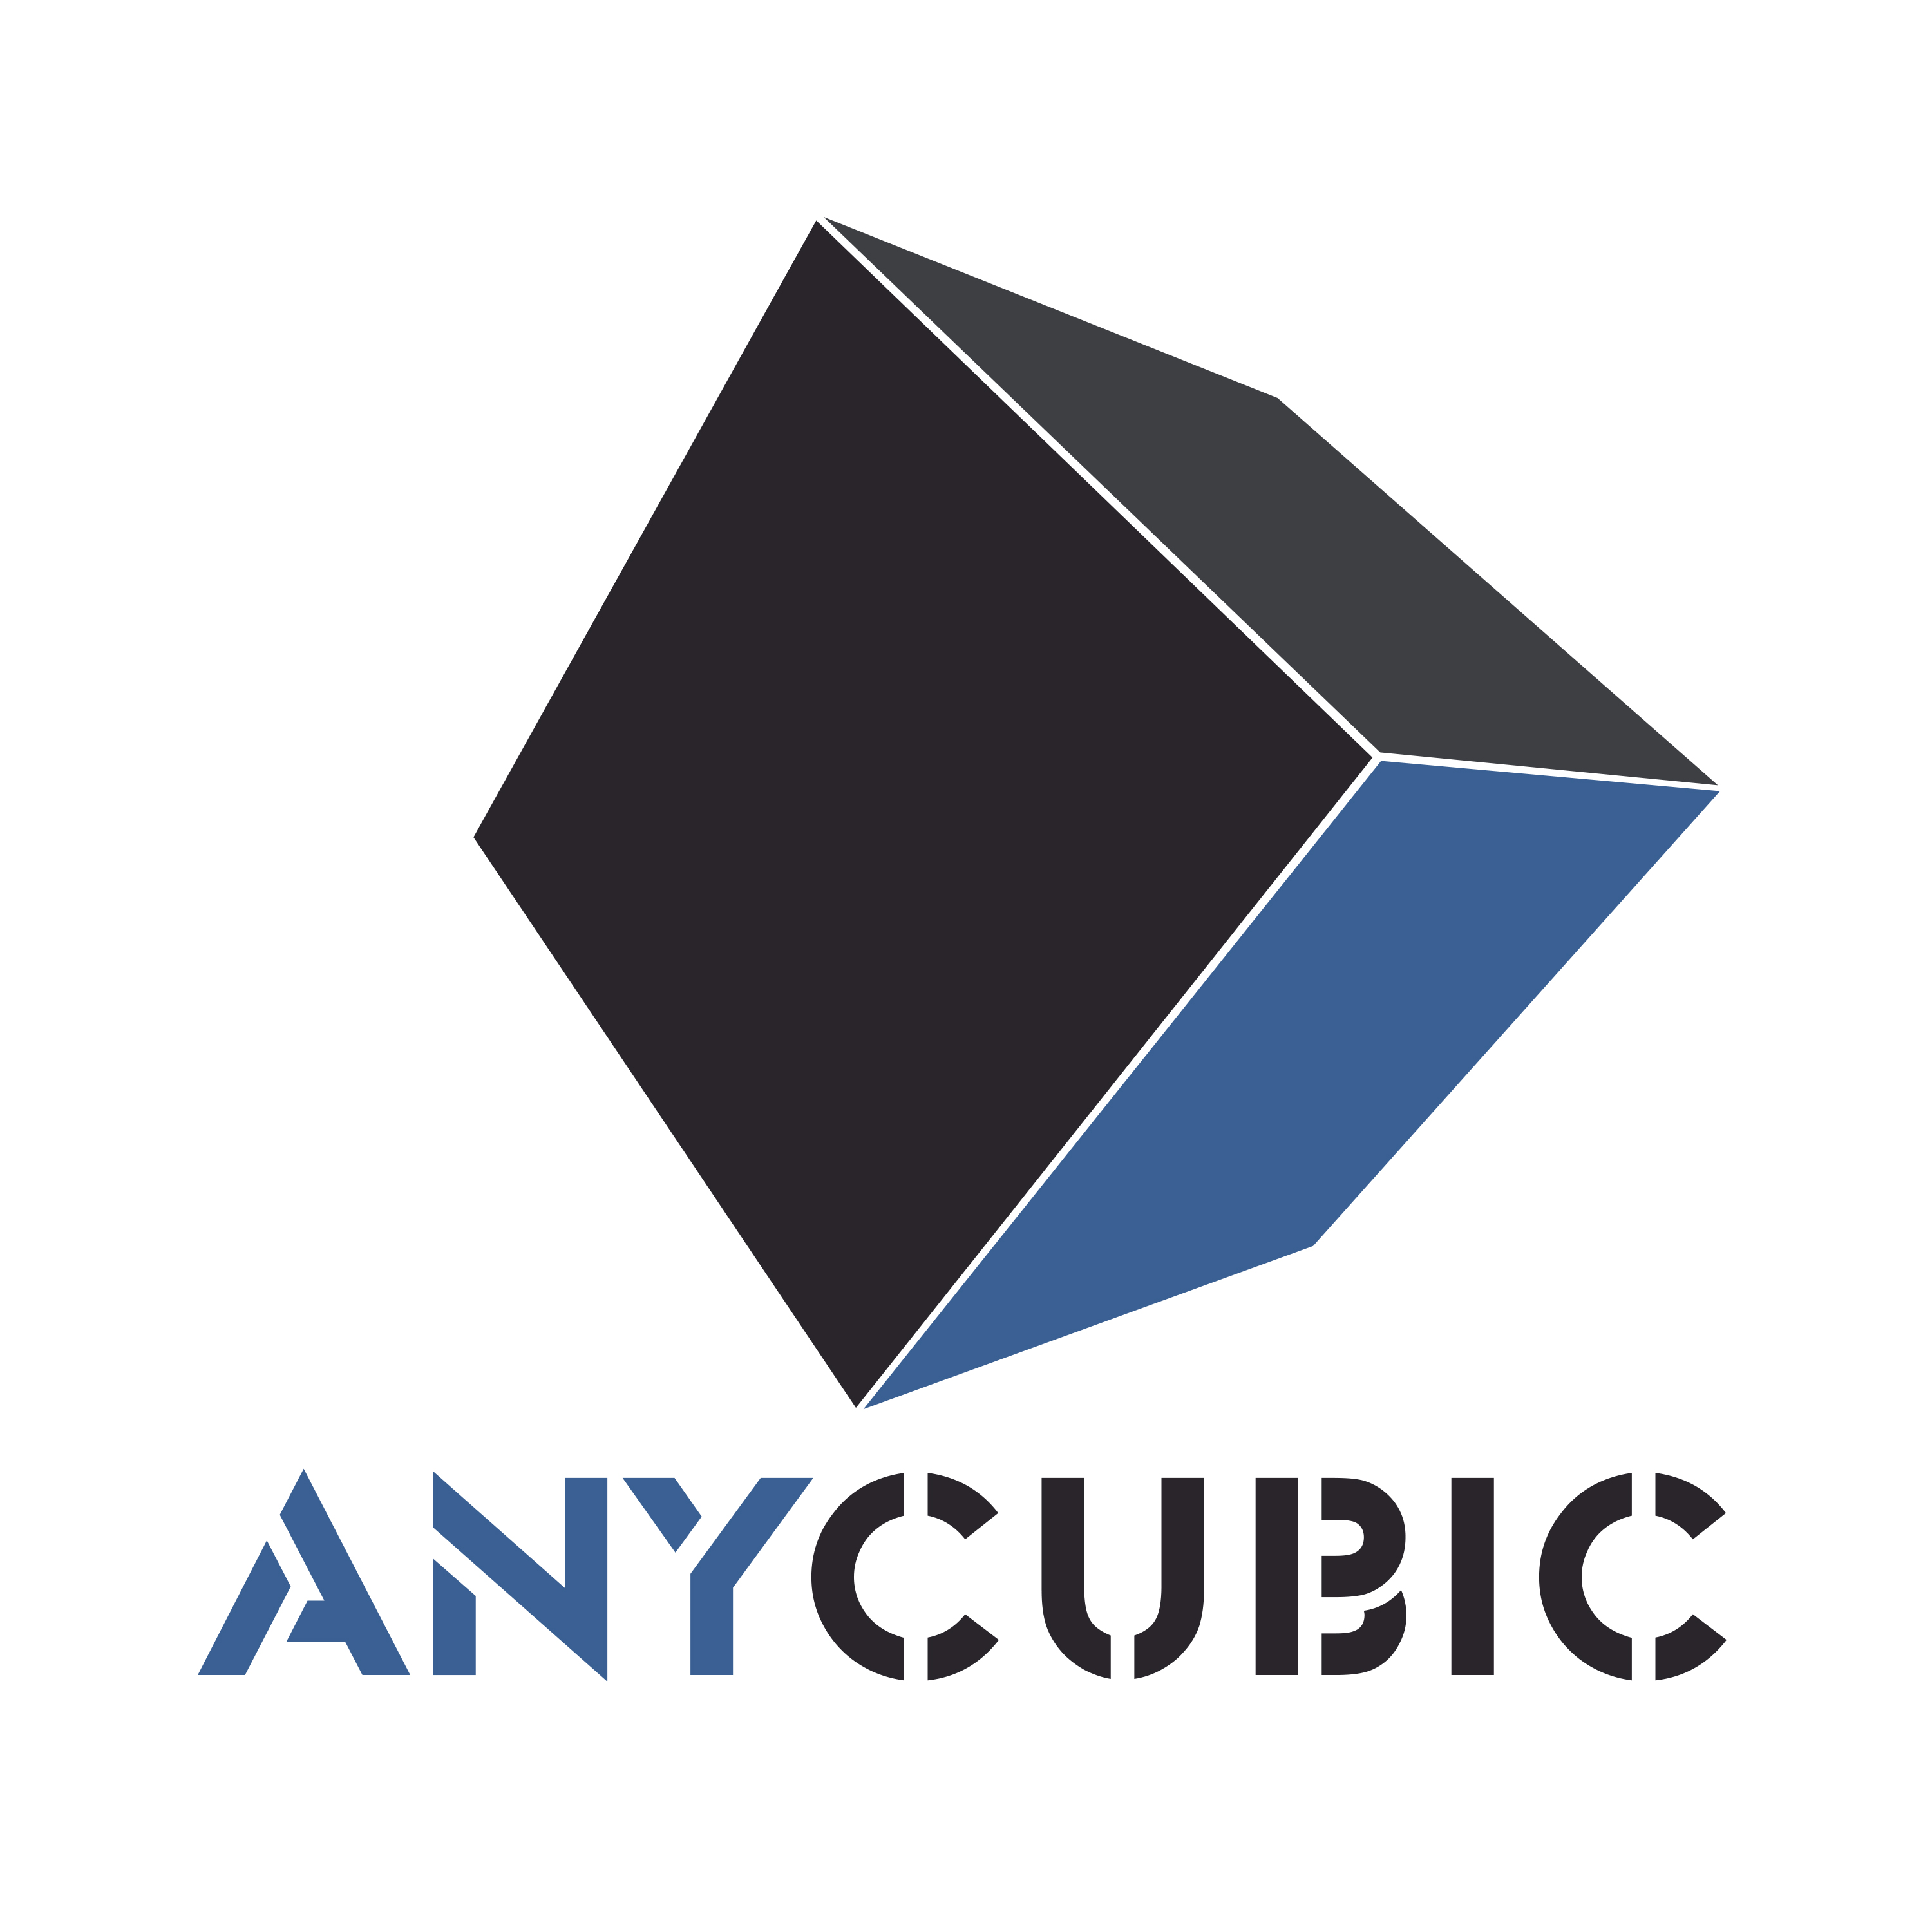 $20 Anycubic Voucher Code